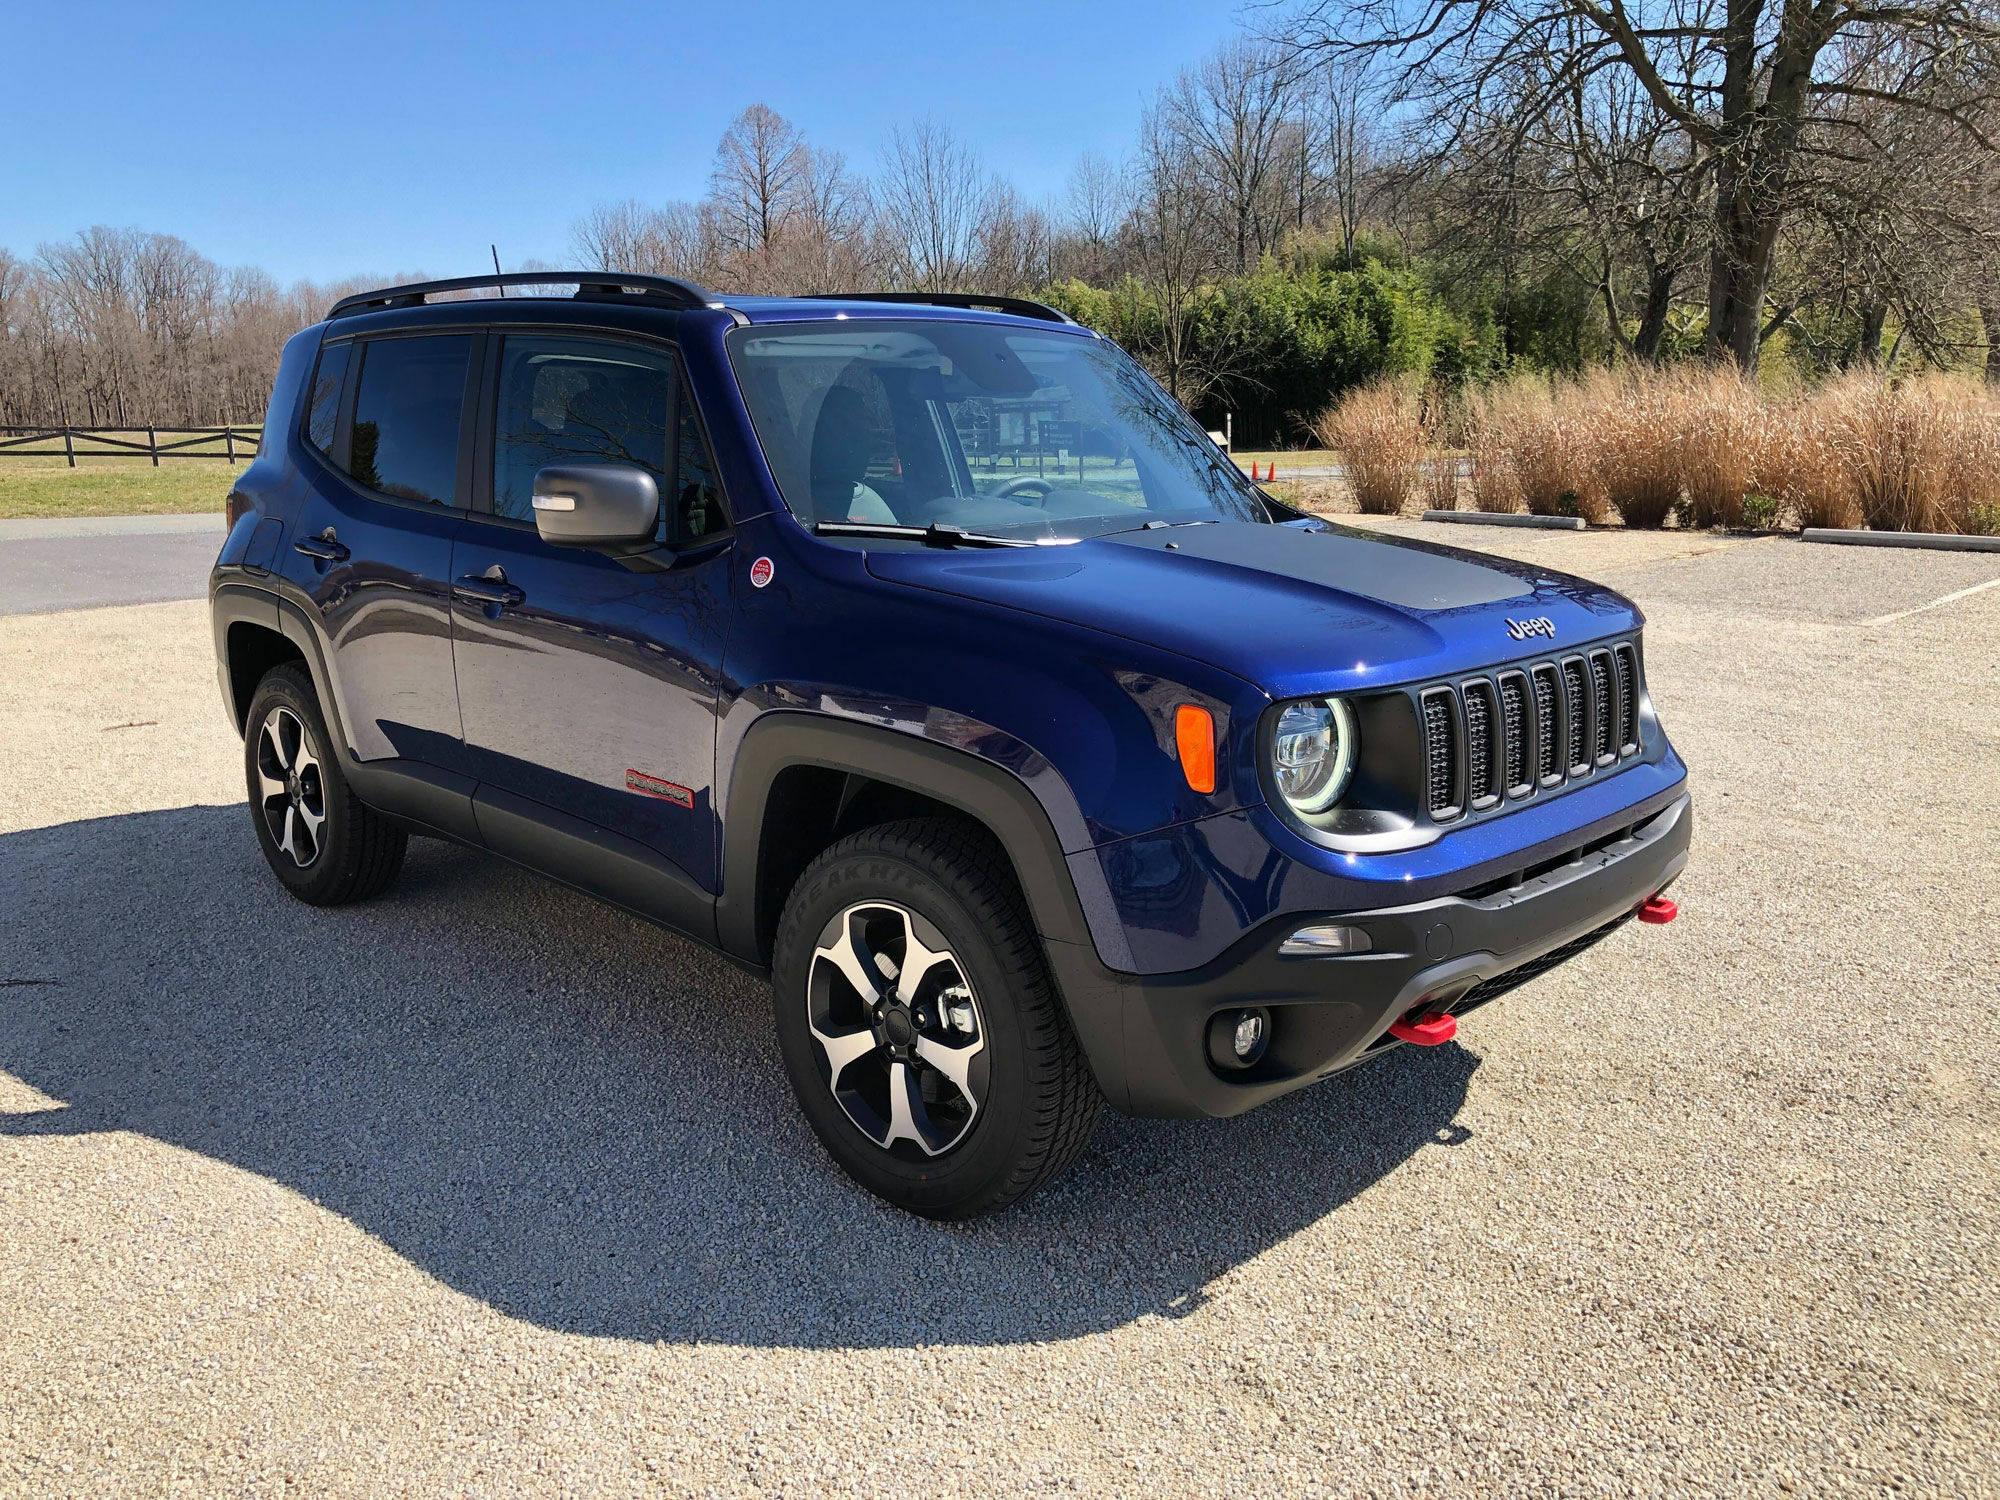 informatie uitvegen Me Car Review: With a new engine, Jeep's 2020 Renegade packs a punch